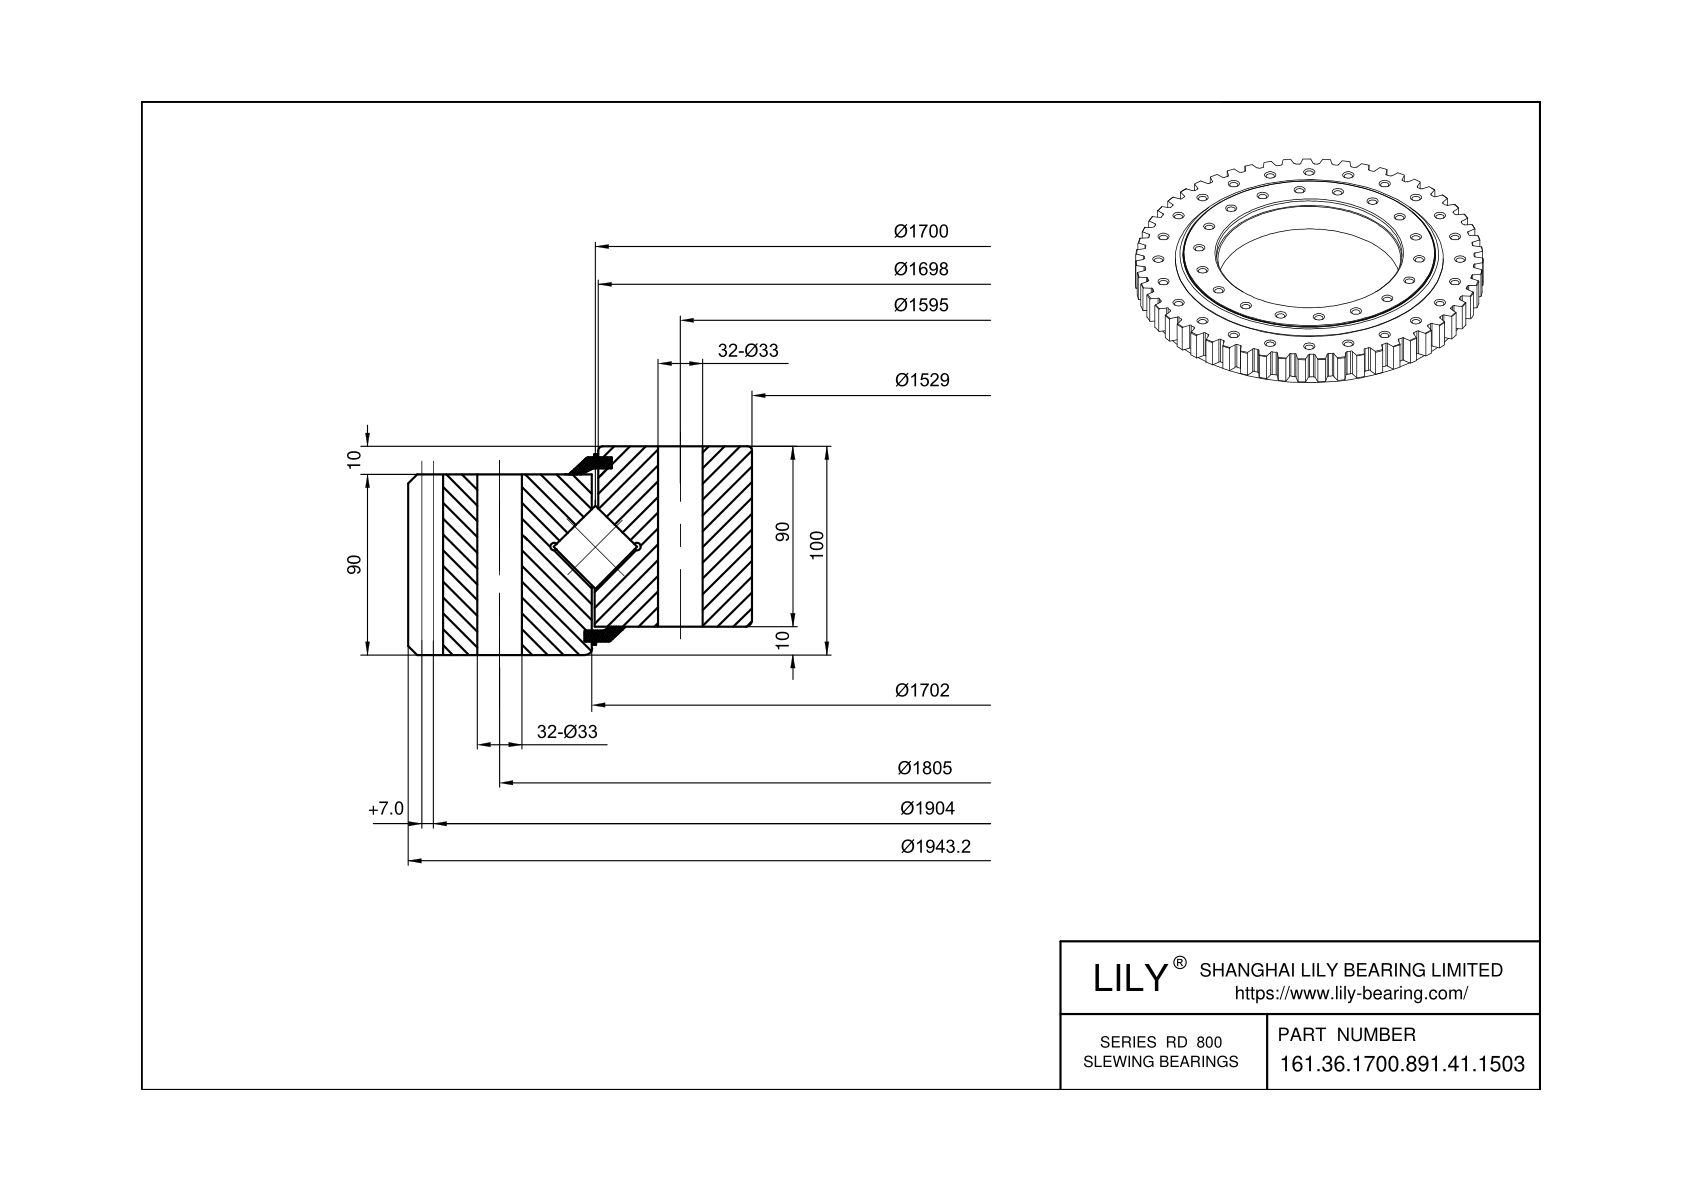 161.36.1700.891.41.1503 Cross Roller Slewing Ring Bearing cad drawing